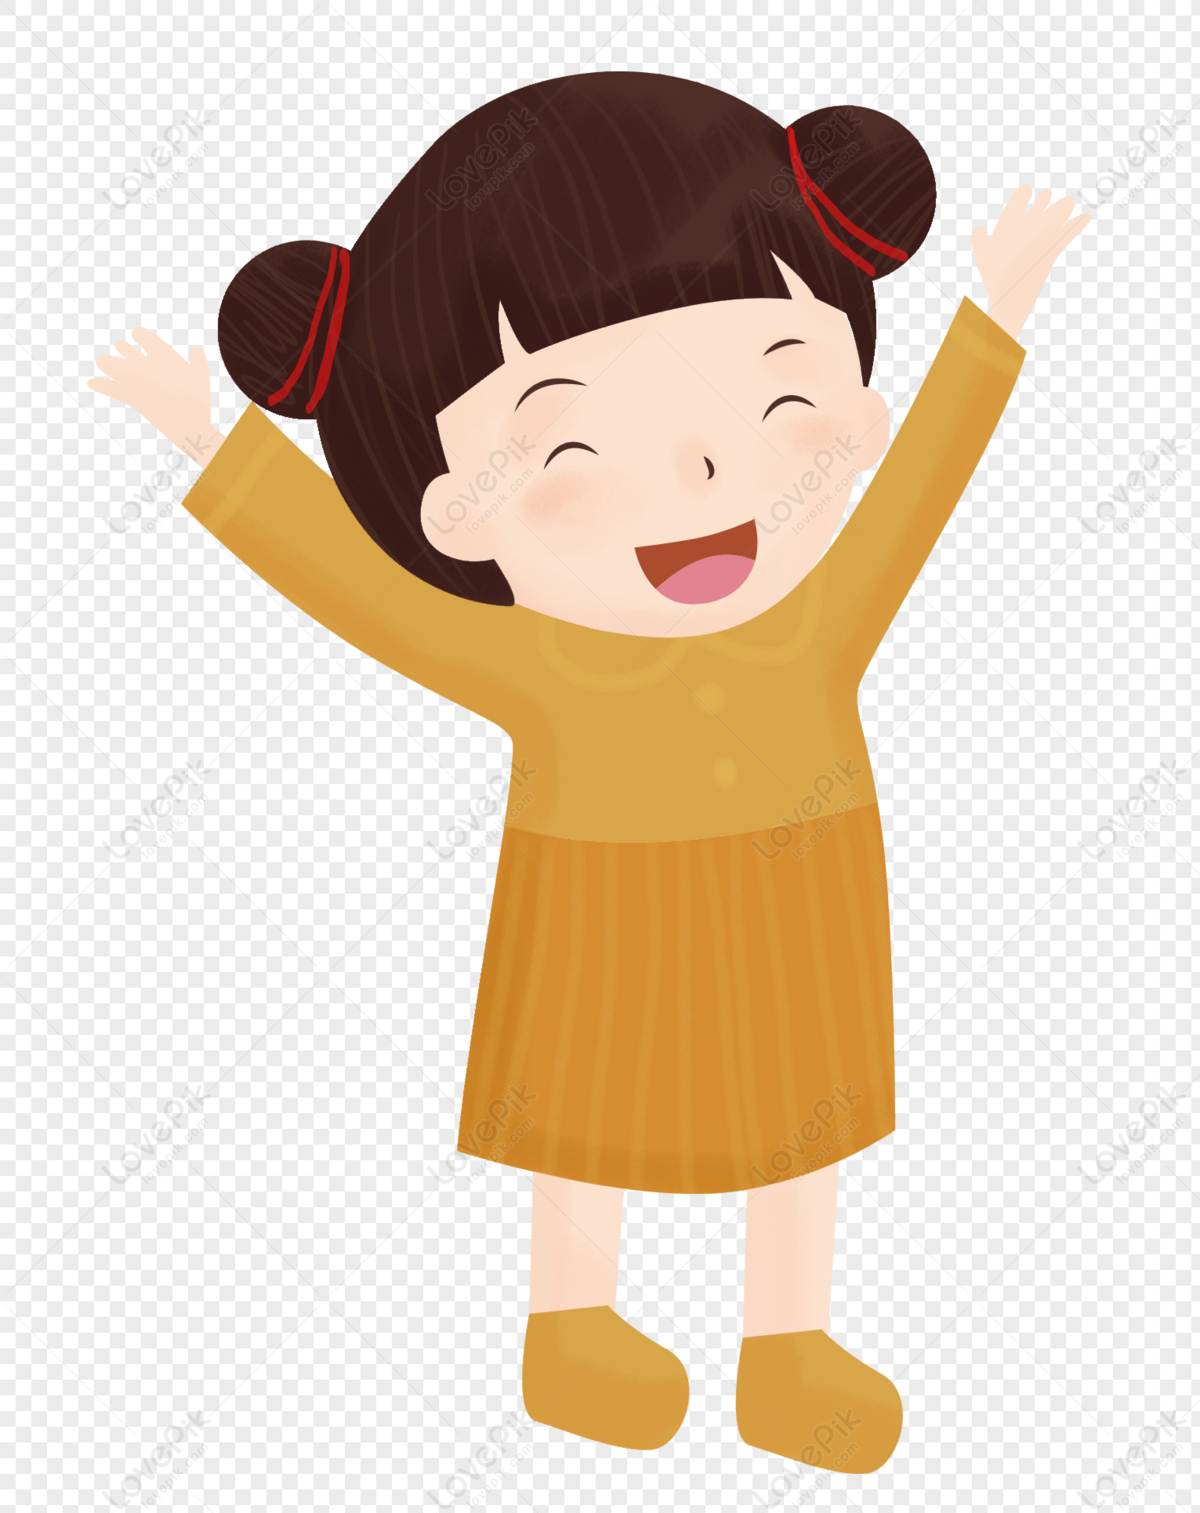 Cartoon Girl PNG Image And Clipart Image For Free Download - Lovepik |  400188968